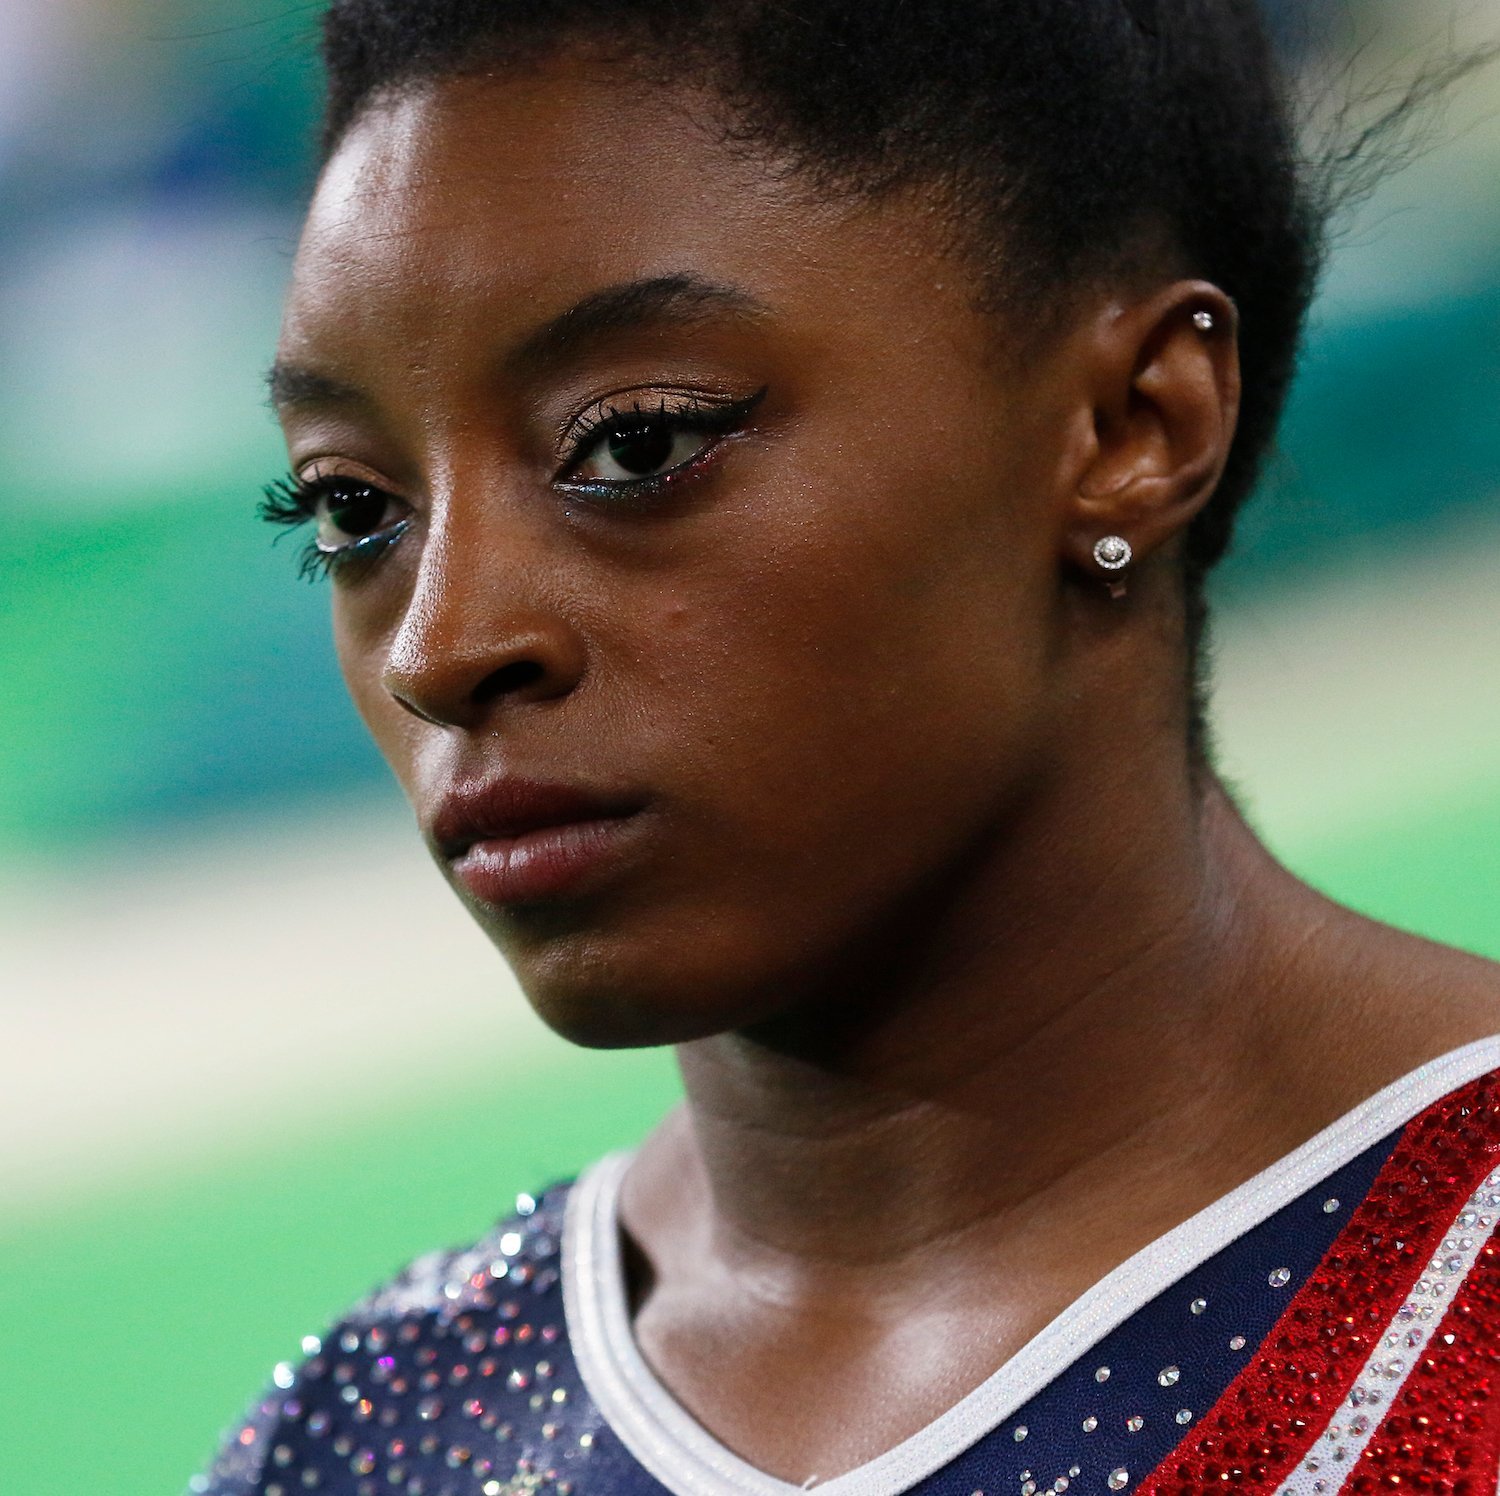 Listen: Simone Biles Withdraws From All-Around Competition